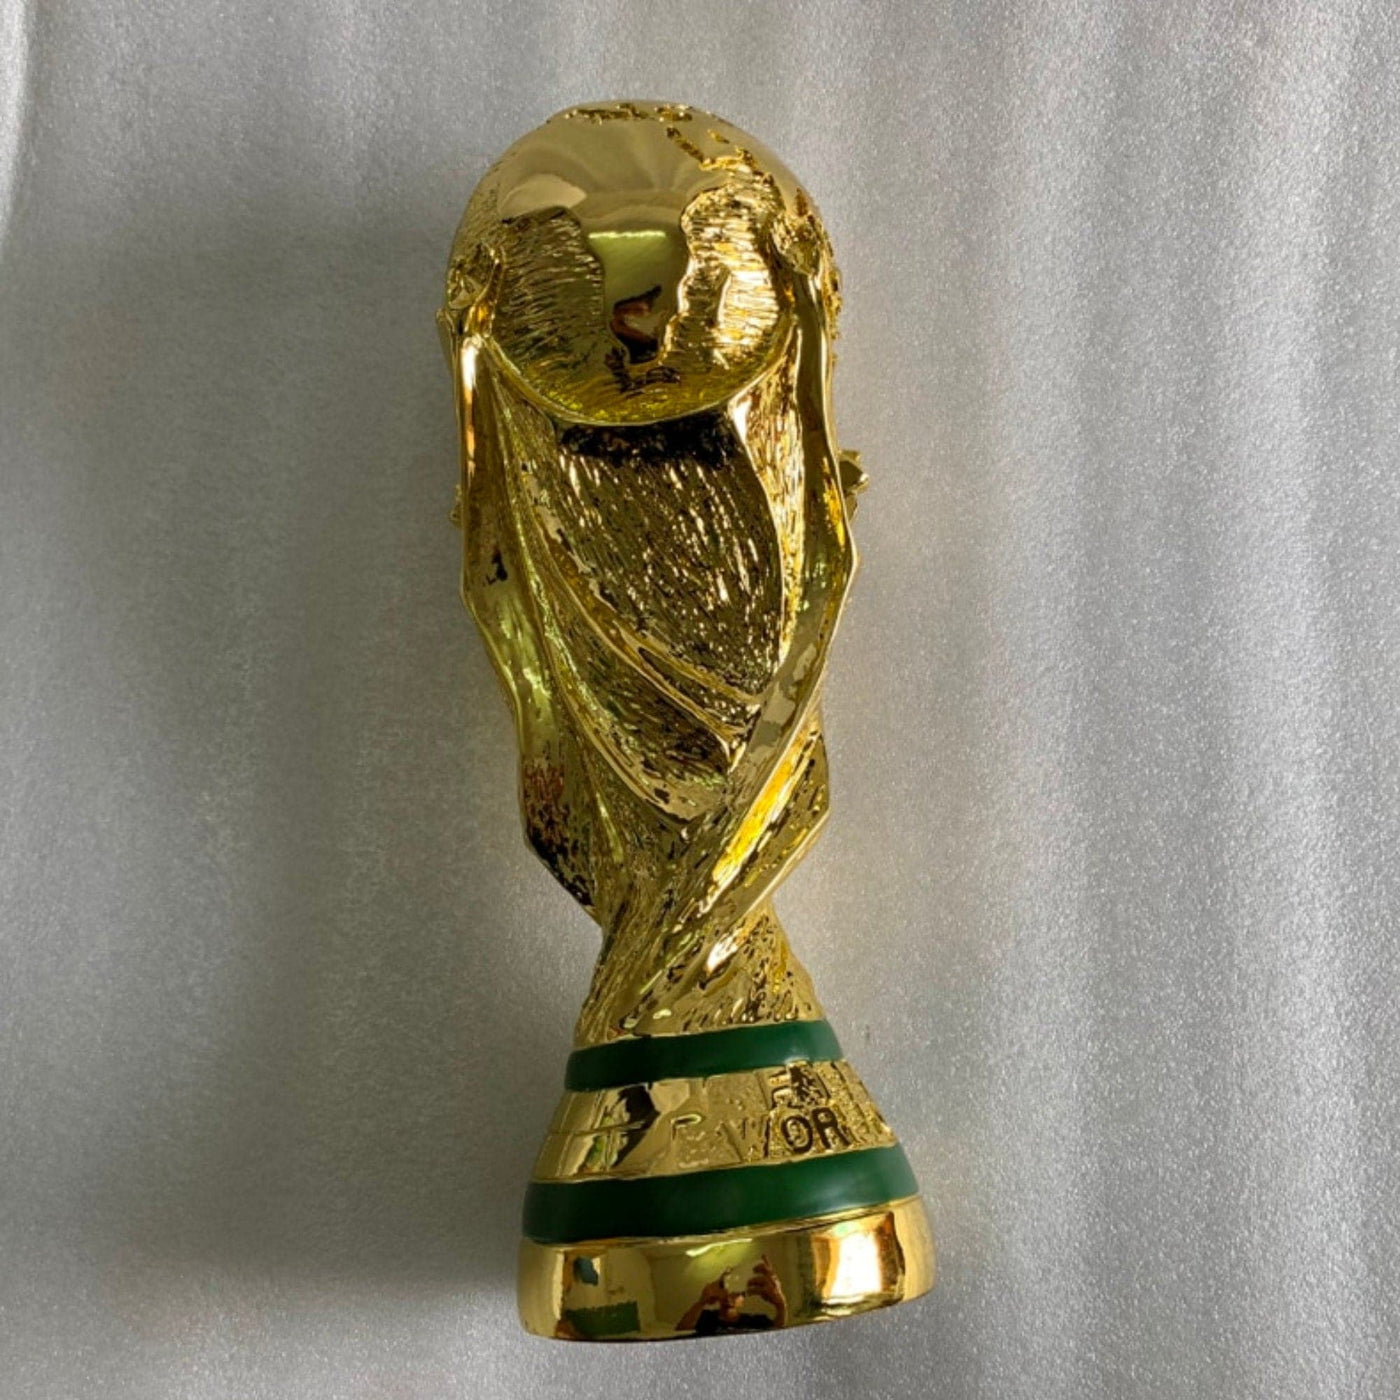 Replica World Cup / Wold cup trophy / Replica football cup / Qatar world cup / Trophy football / Soccer world cup / Soccer trophy / Qatar